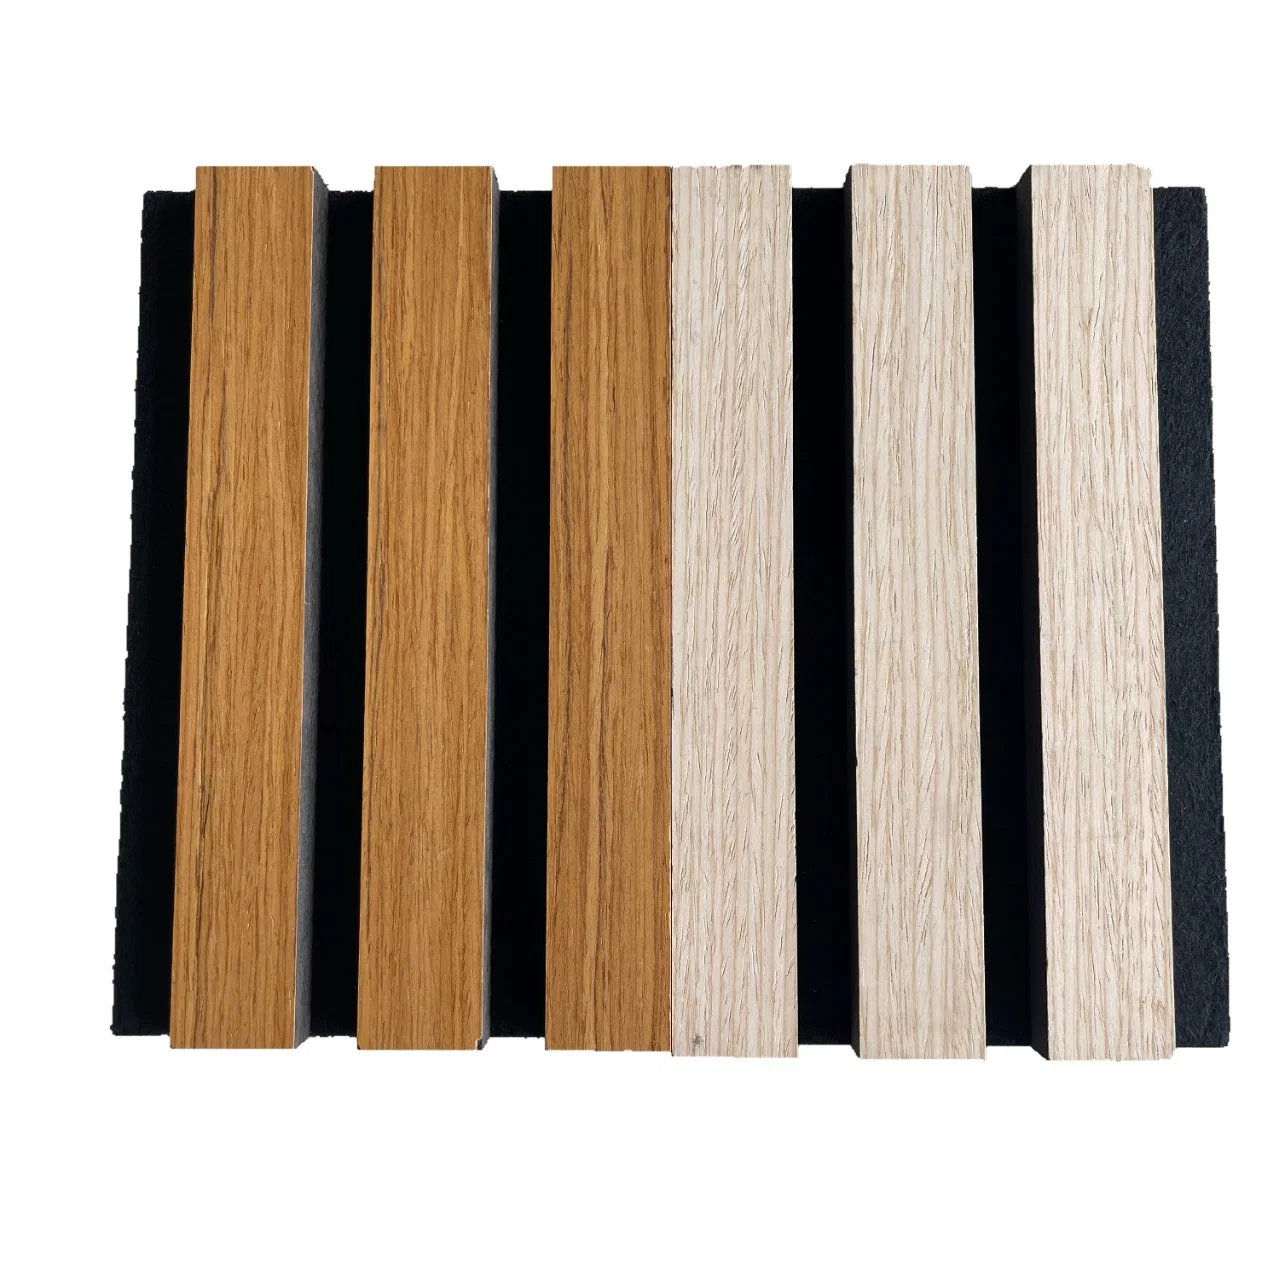 Slat Pattern Wood Felt Acoustic Panel Wall Ceiling Interior Decorated Sound Absorption